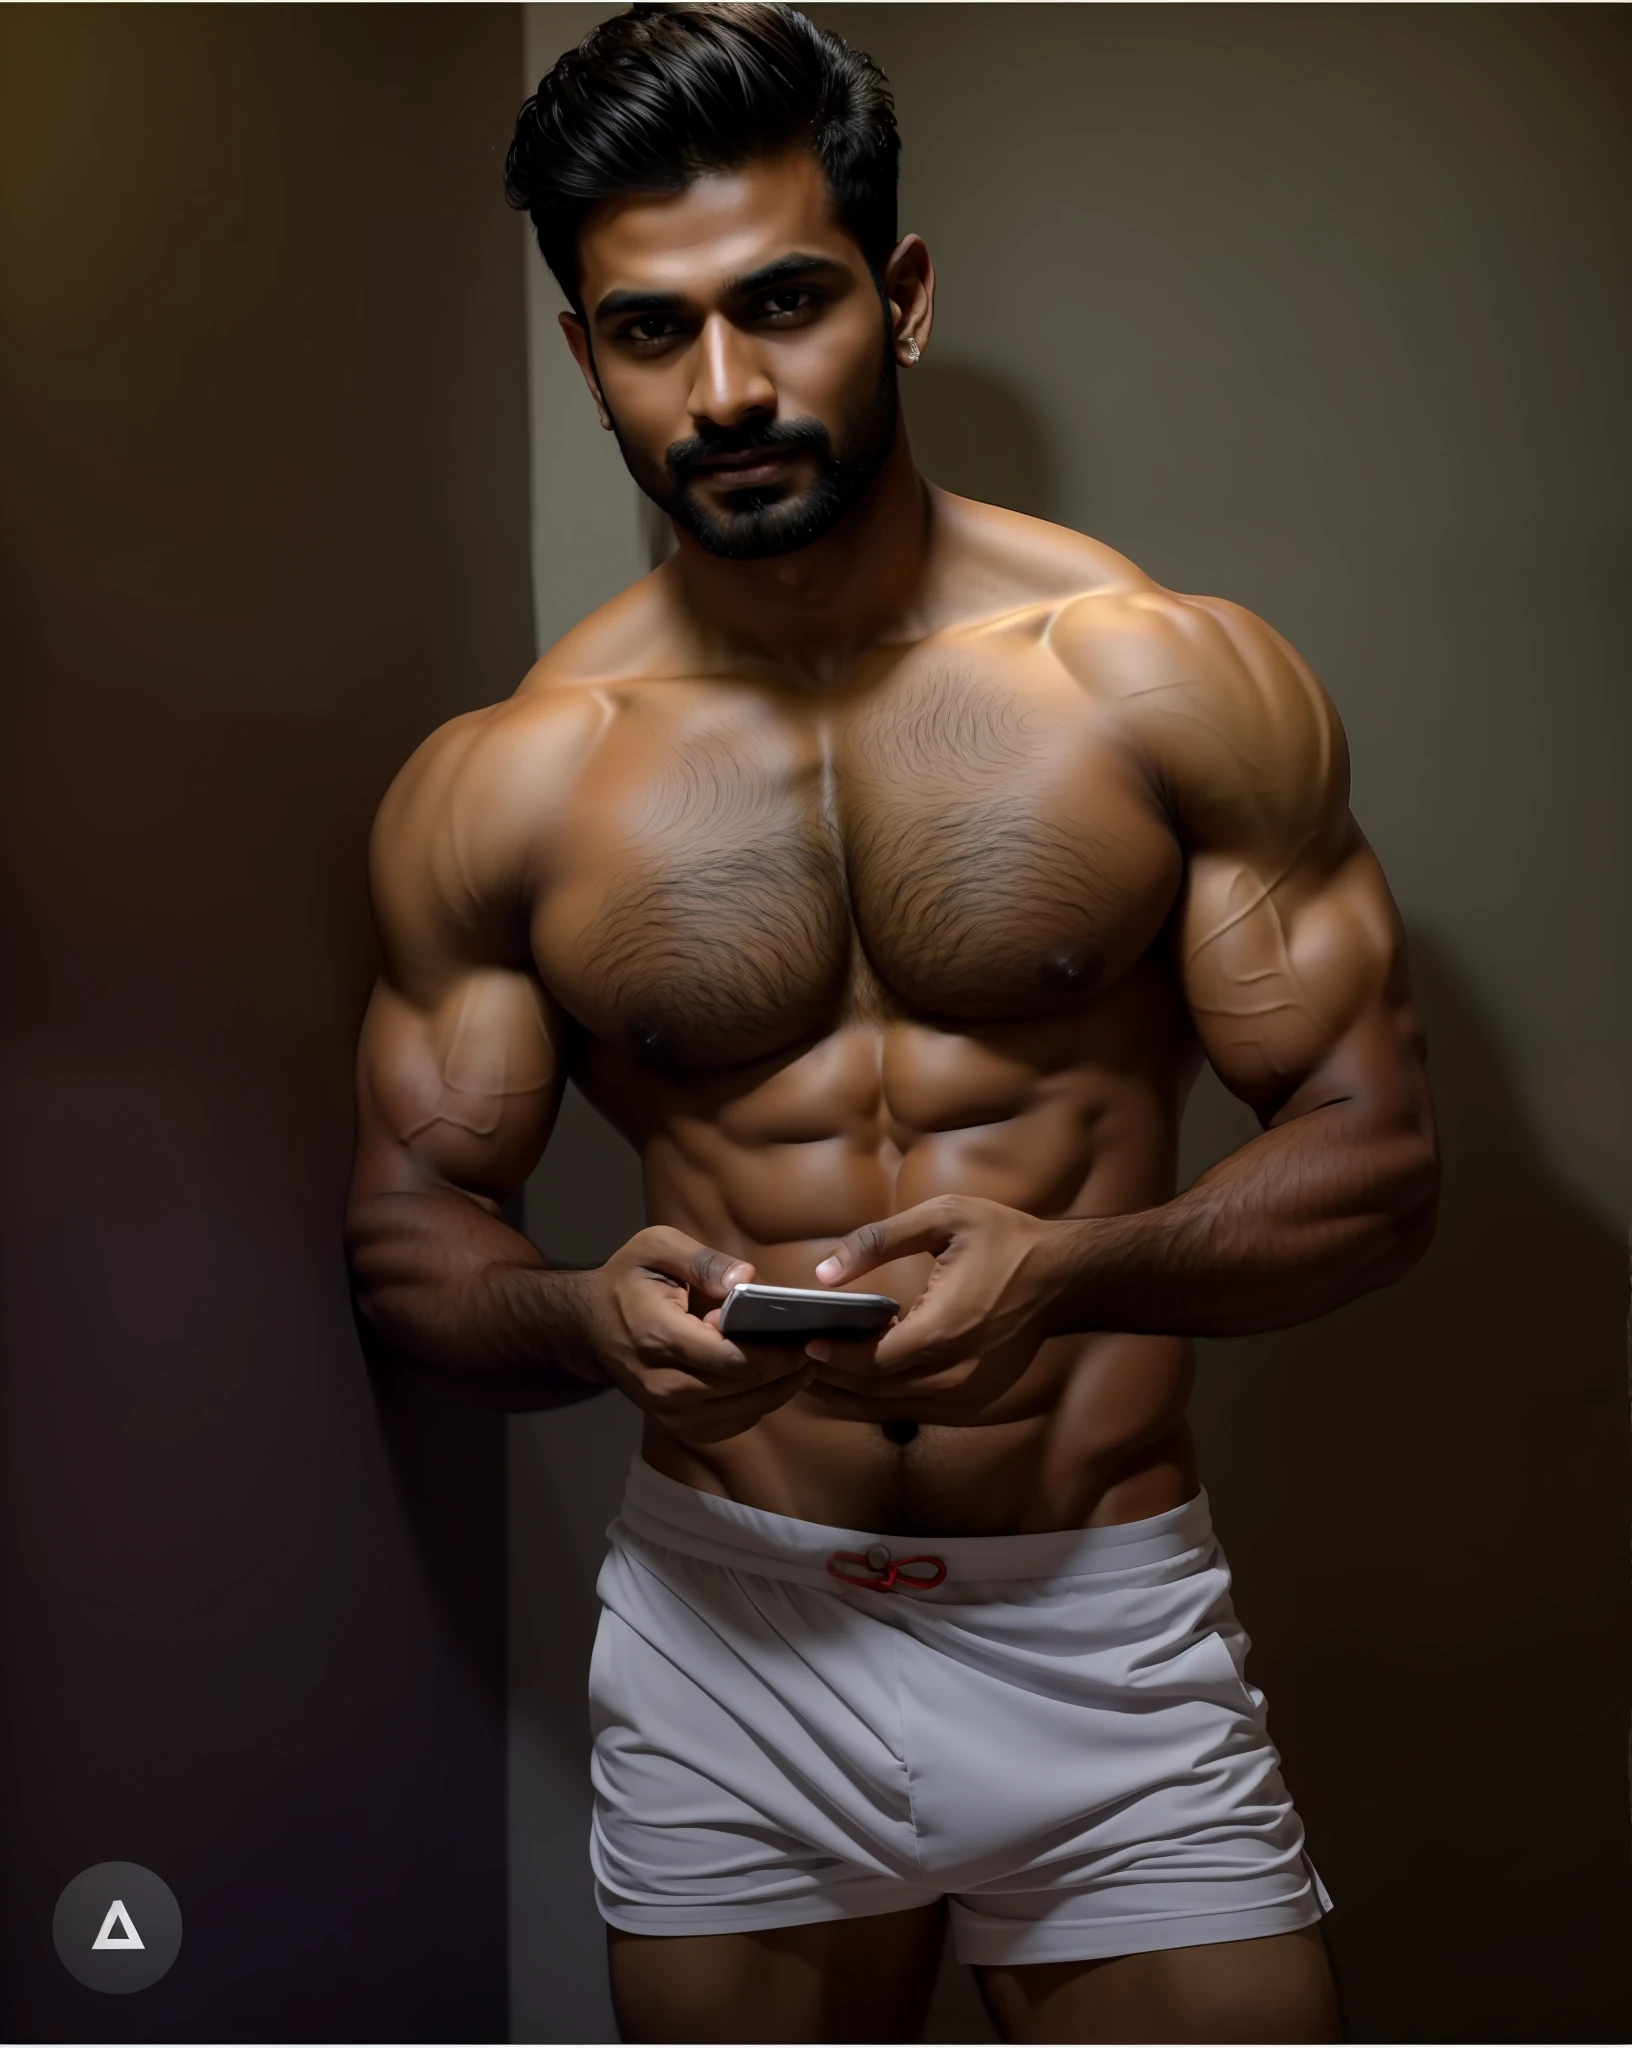 Indian sexy muscular men, having hairy chest, handsome indian boy